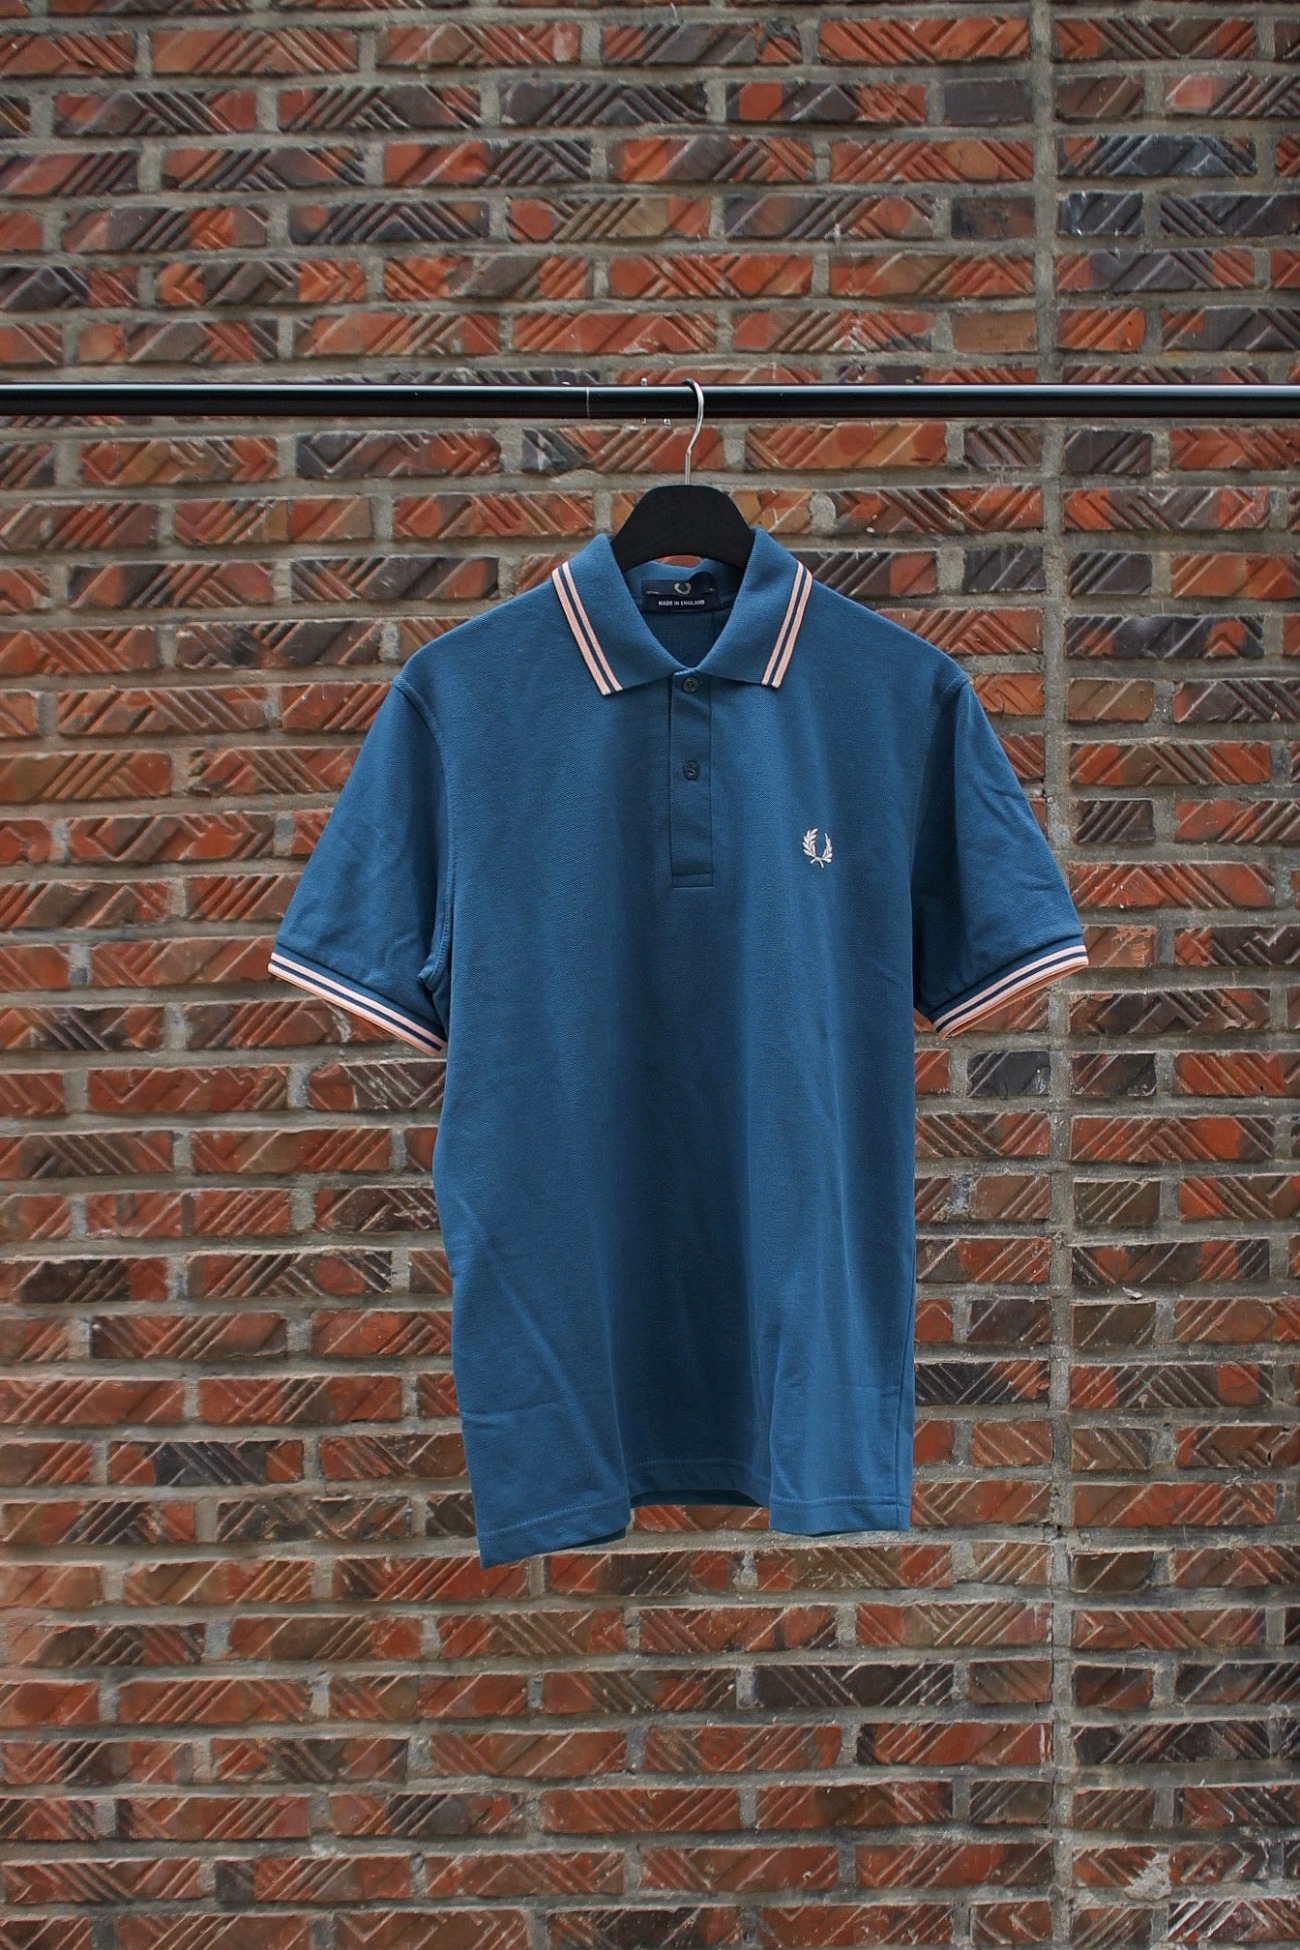 [FRED PERRY] Twin Tipped Fred Perry Shirt (Re-Issues) - Deep Teal